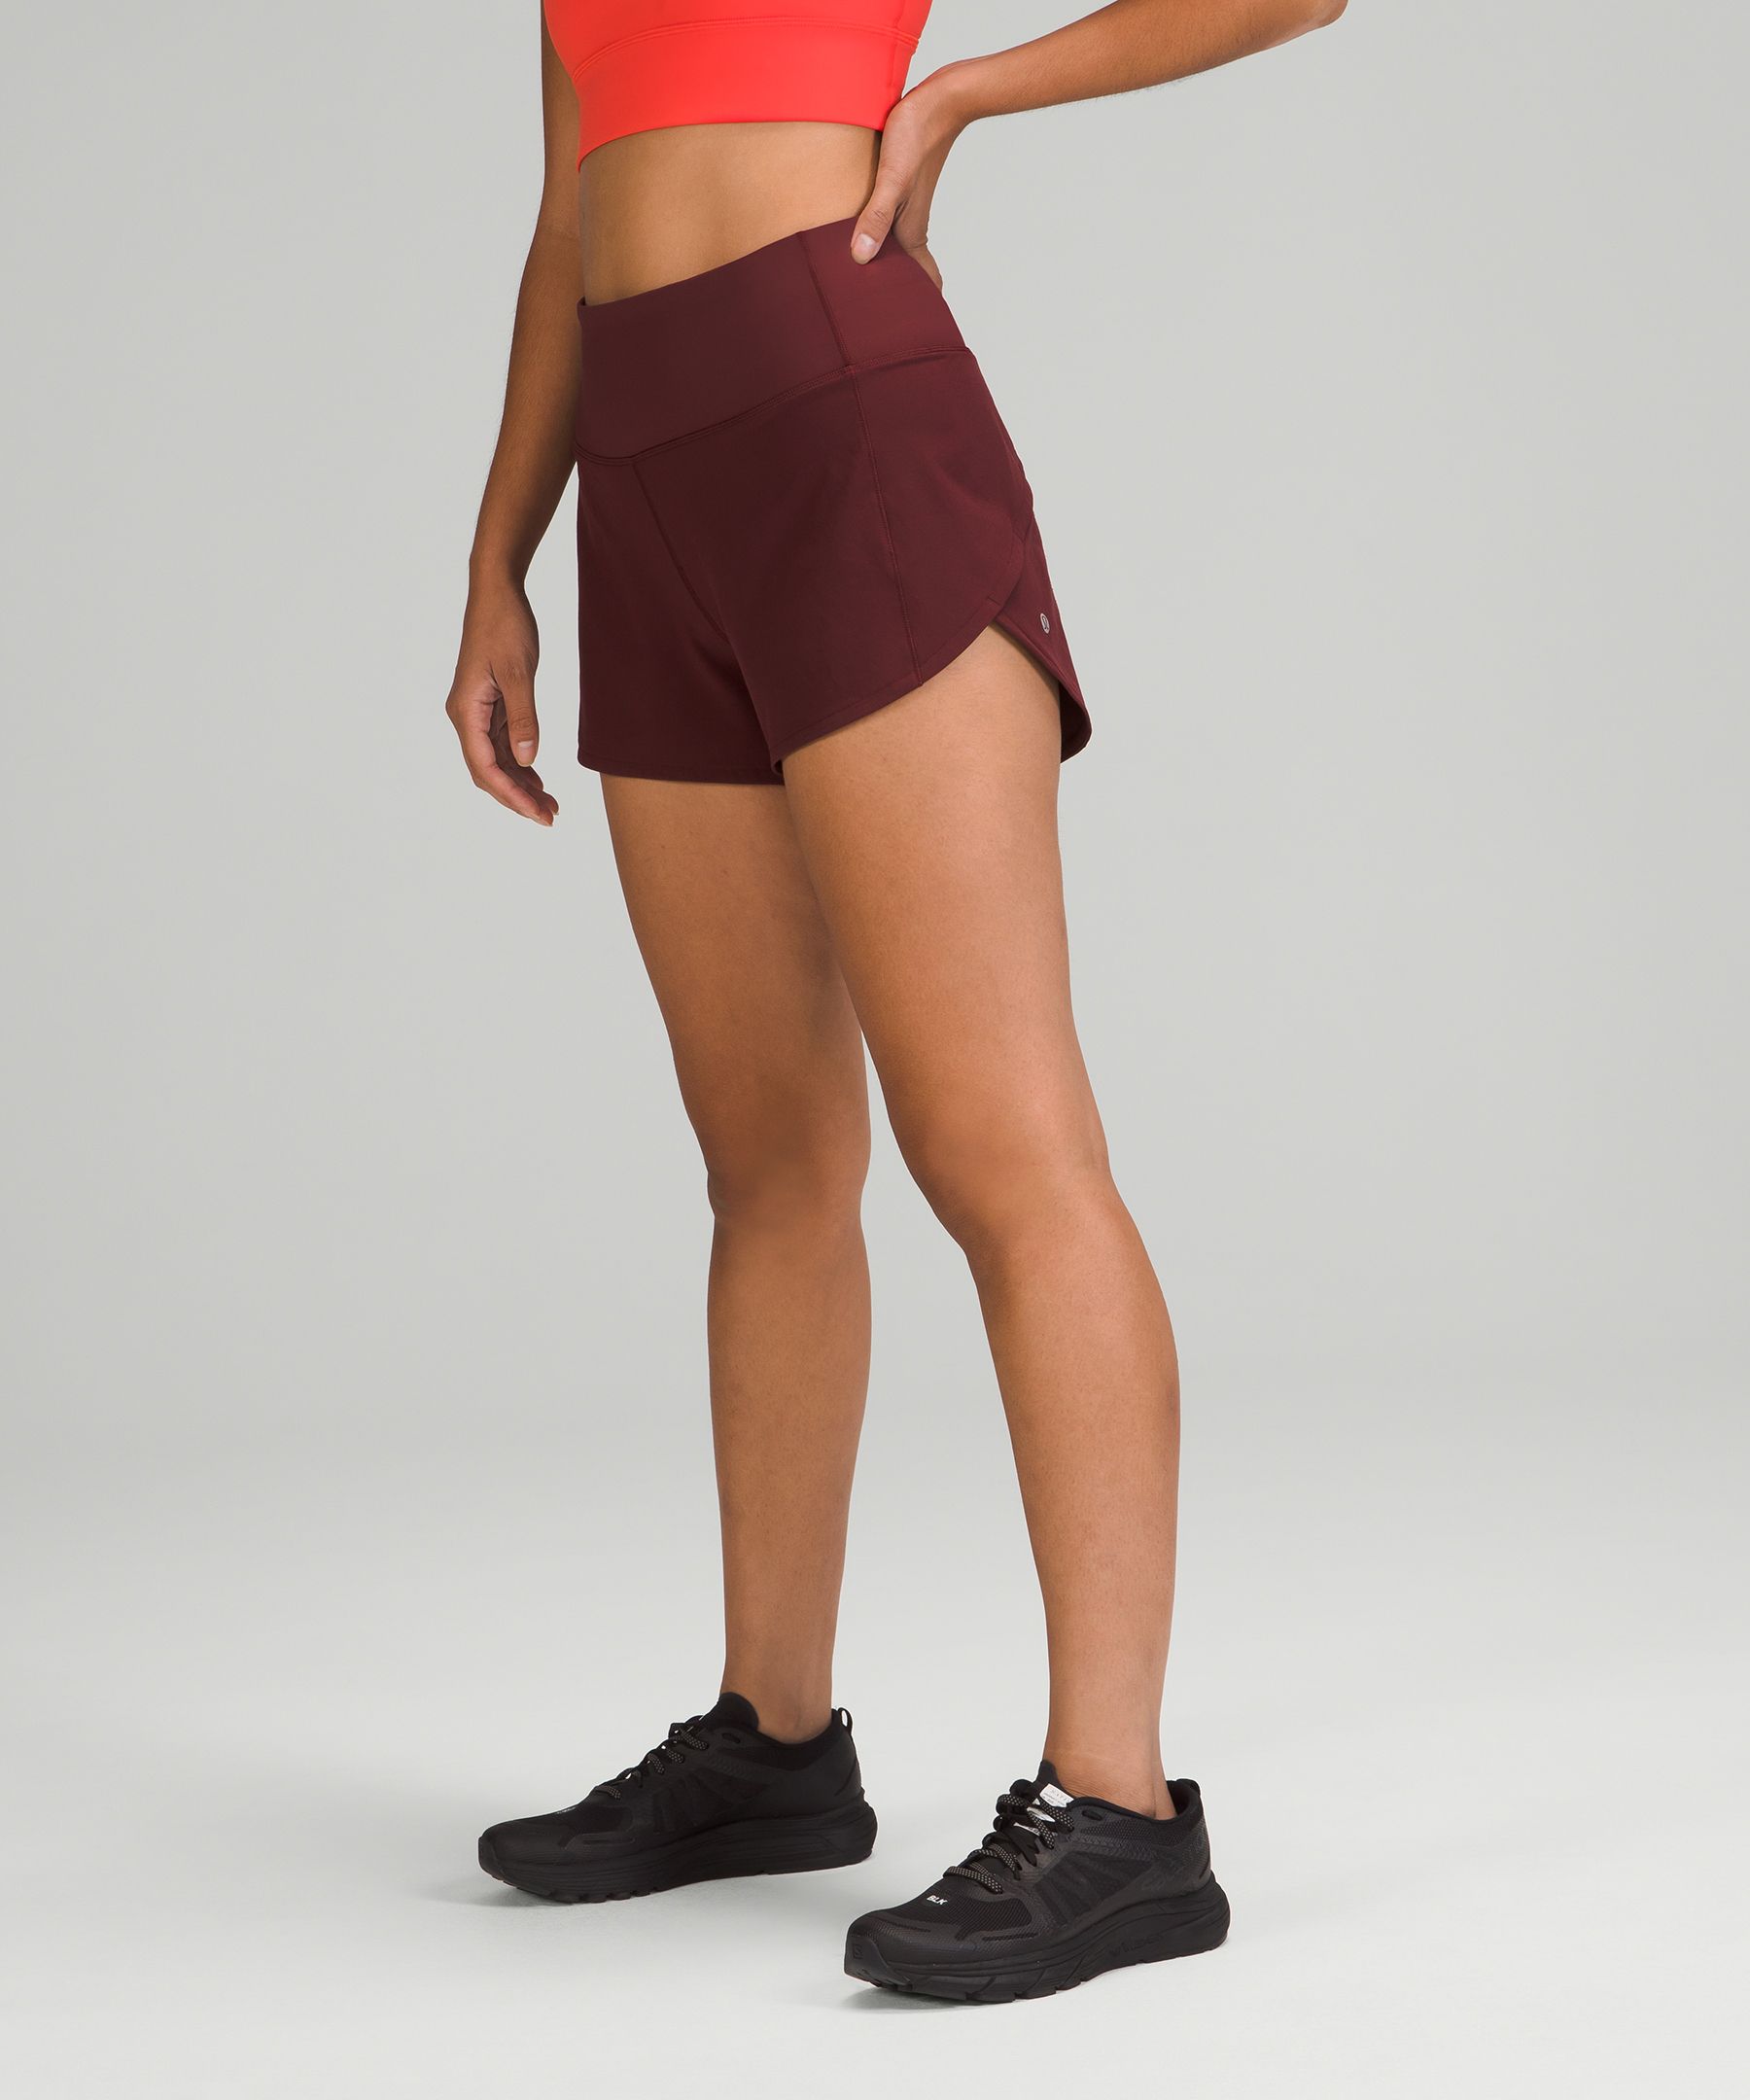 Lululemon Speed Up High-rise Lined Shorts 4" In Red Merlot